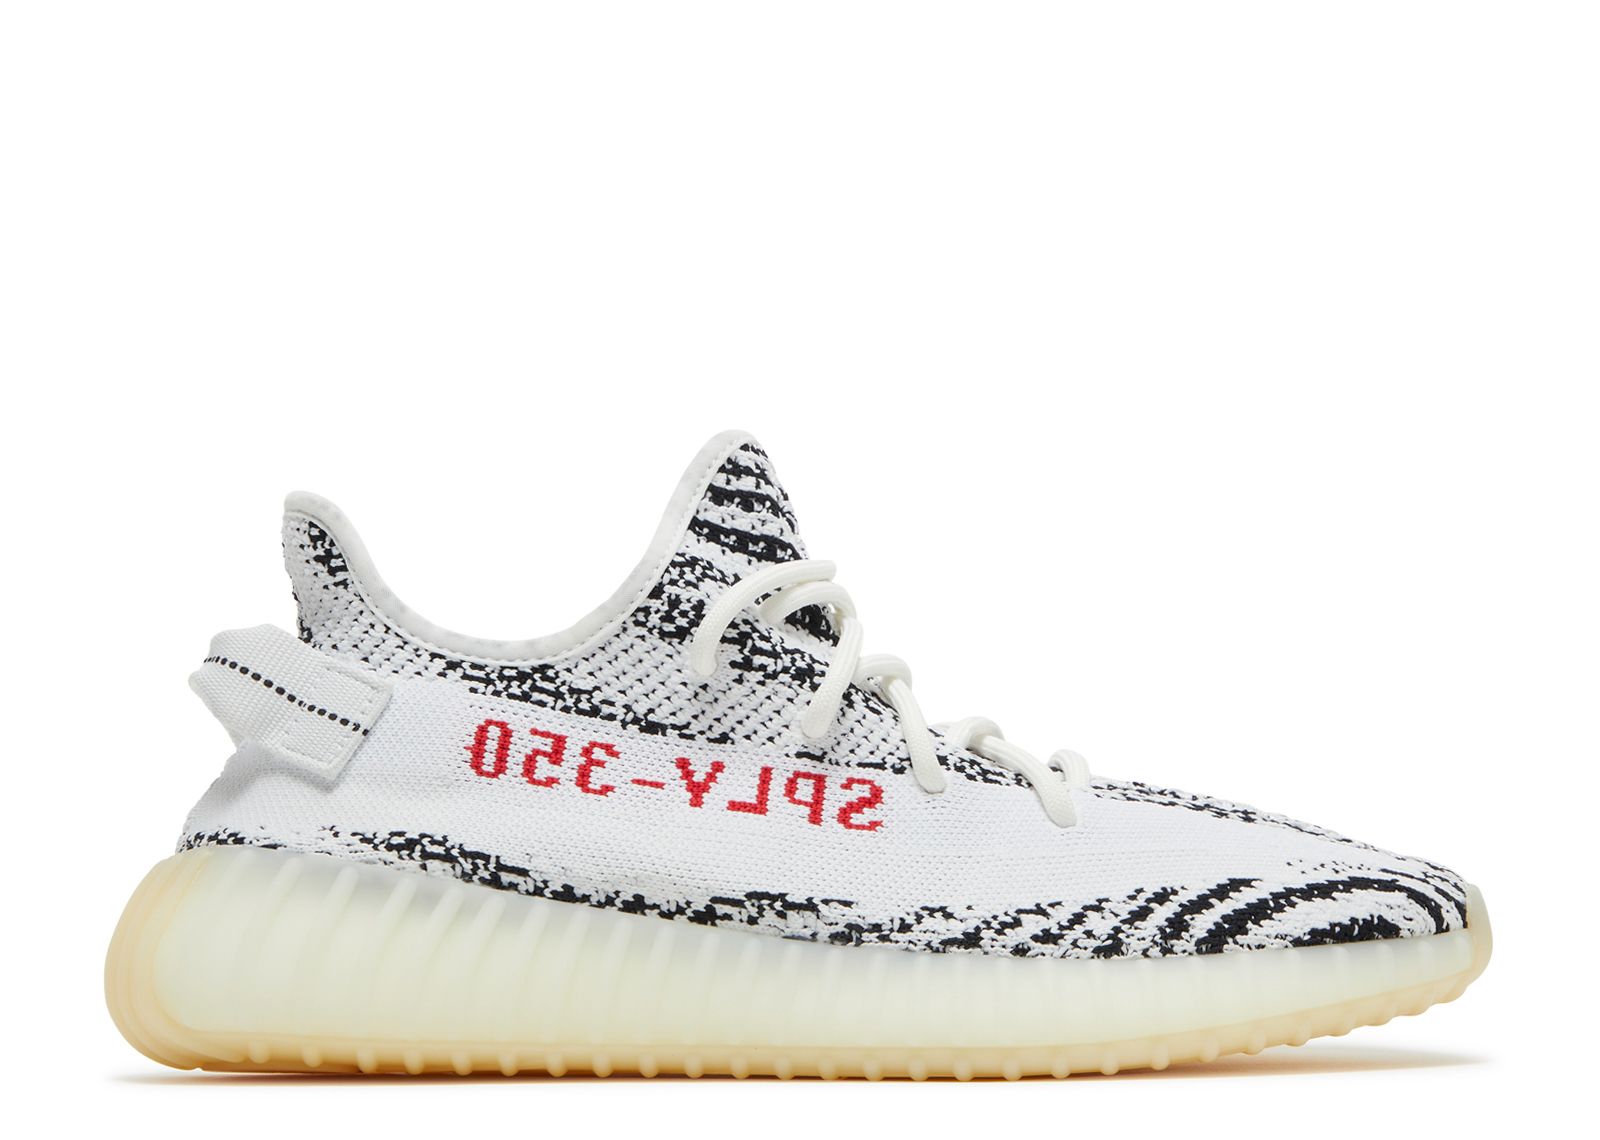 Where To Buy Adidas Yeezy 350 Boost V2 Beluga 66% Off Sale